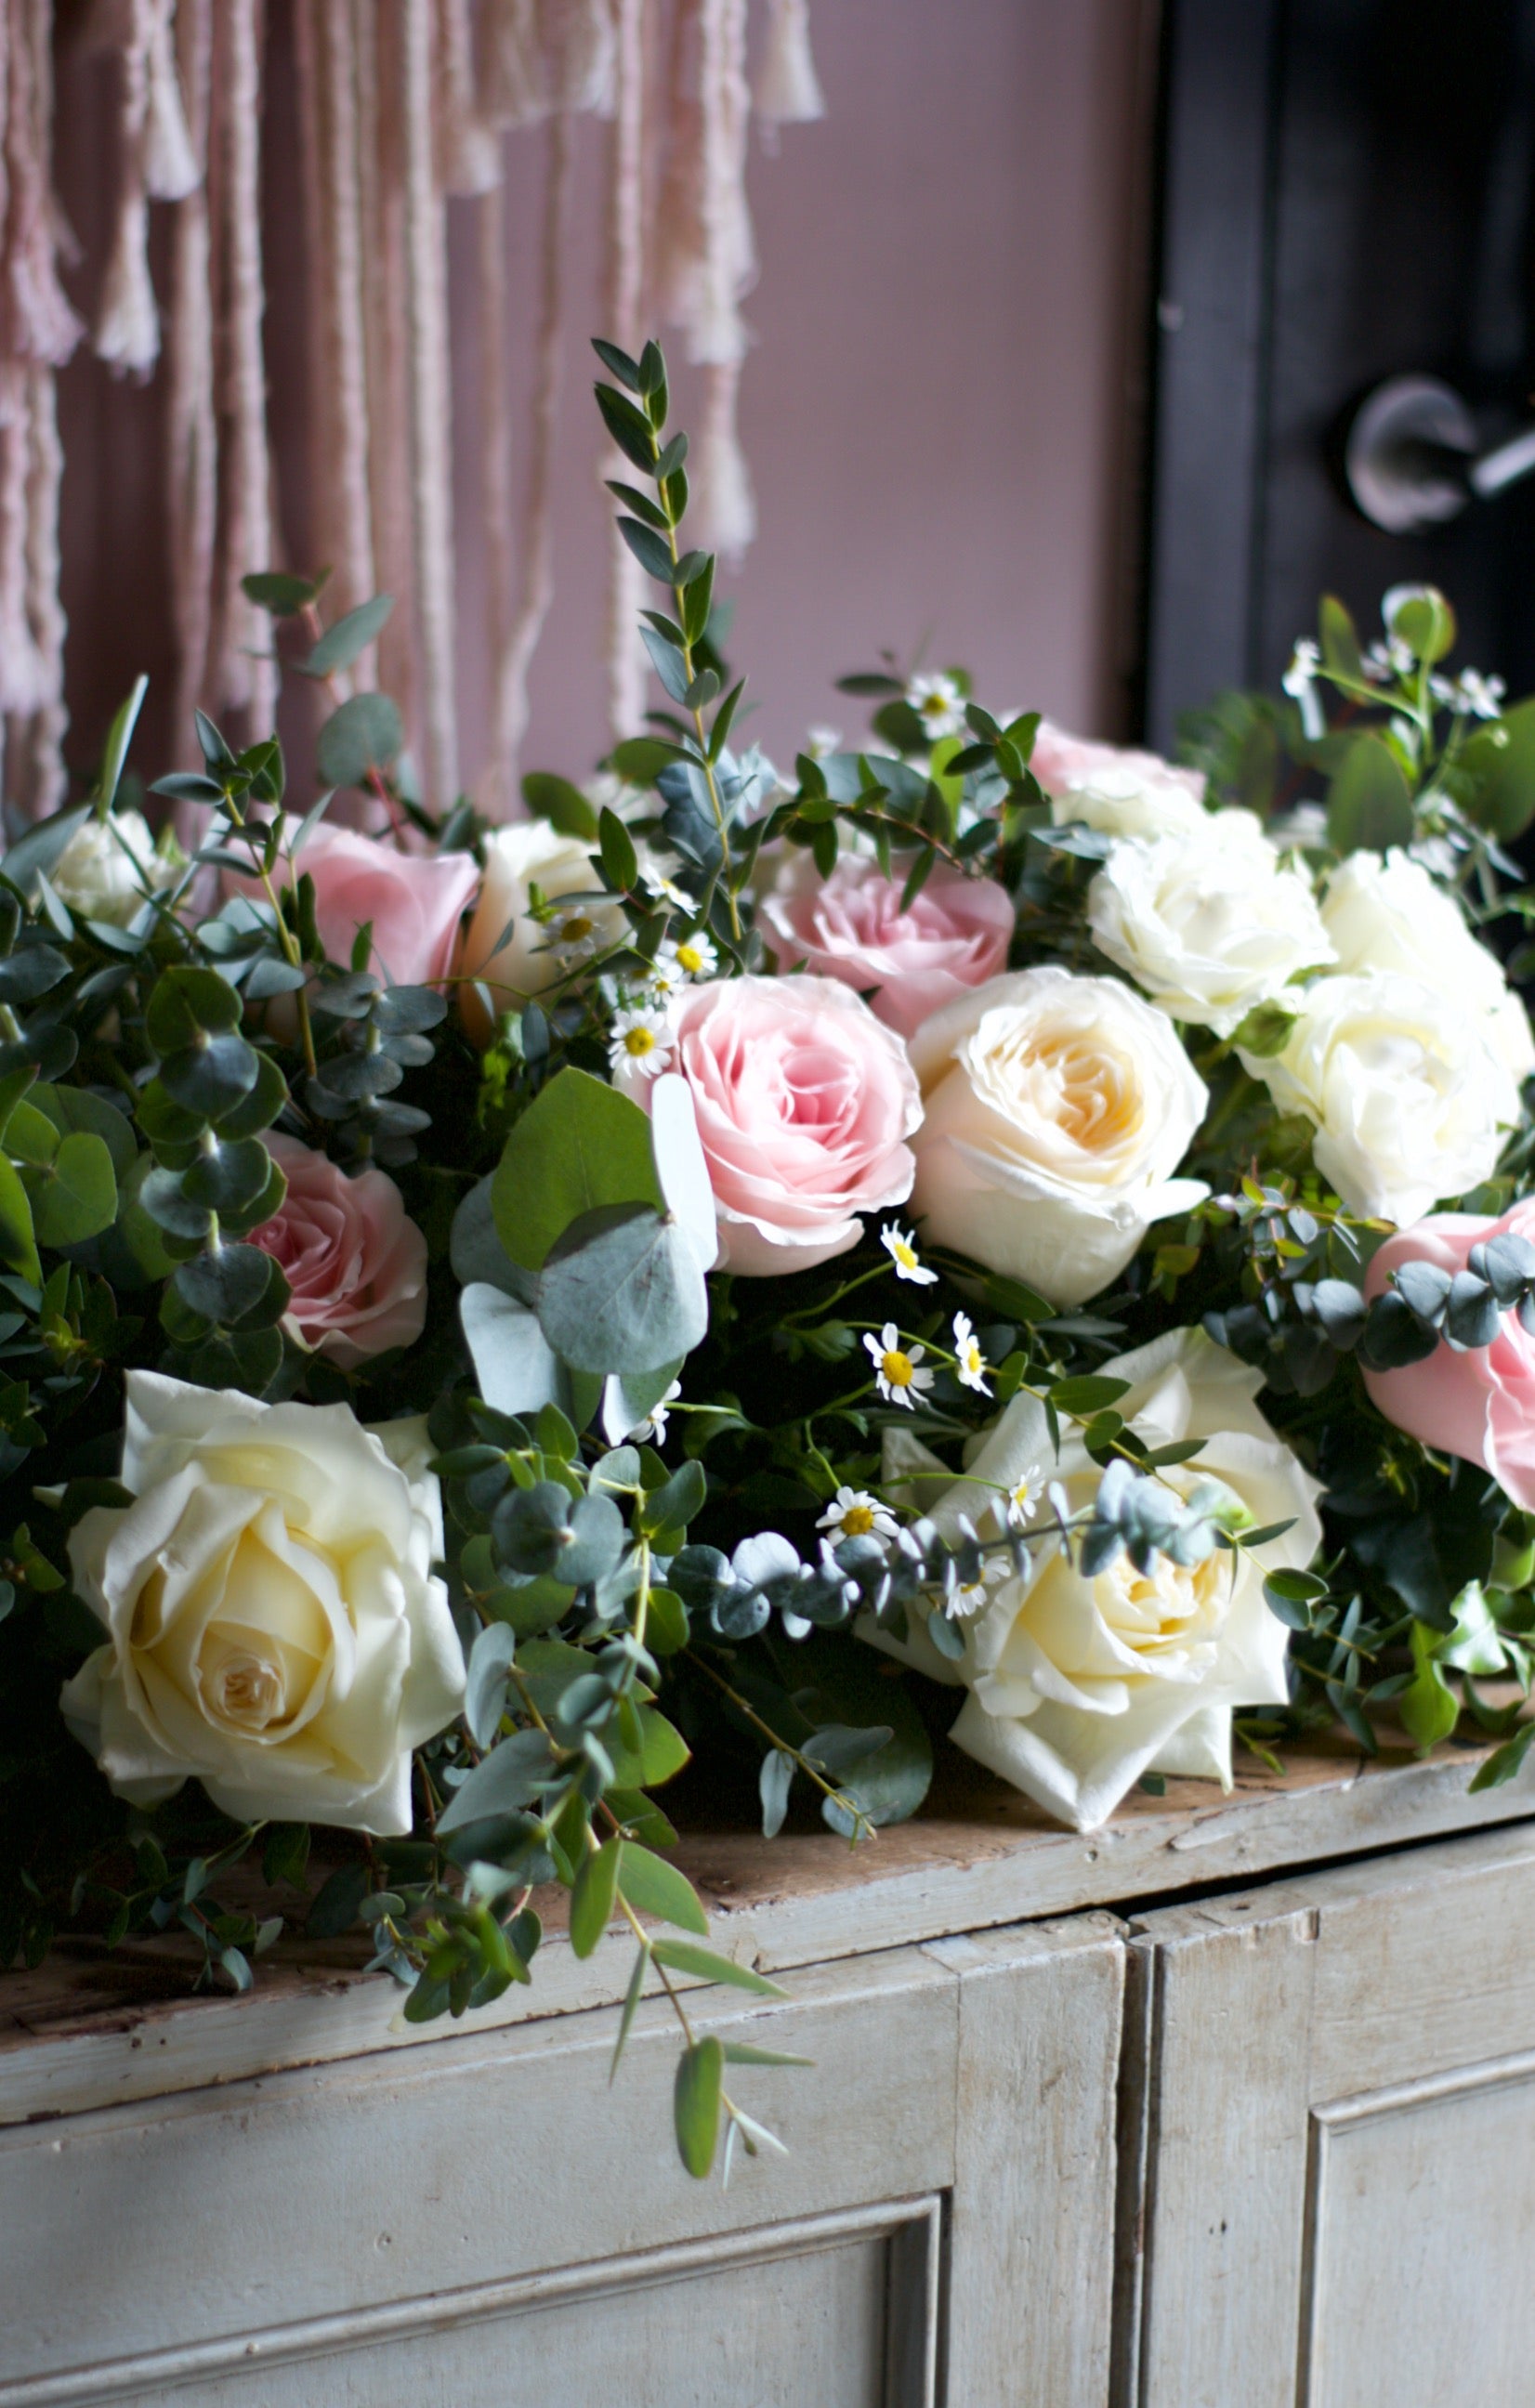 tigerlily florist guernsey flowers delivery wedding flowers funeral